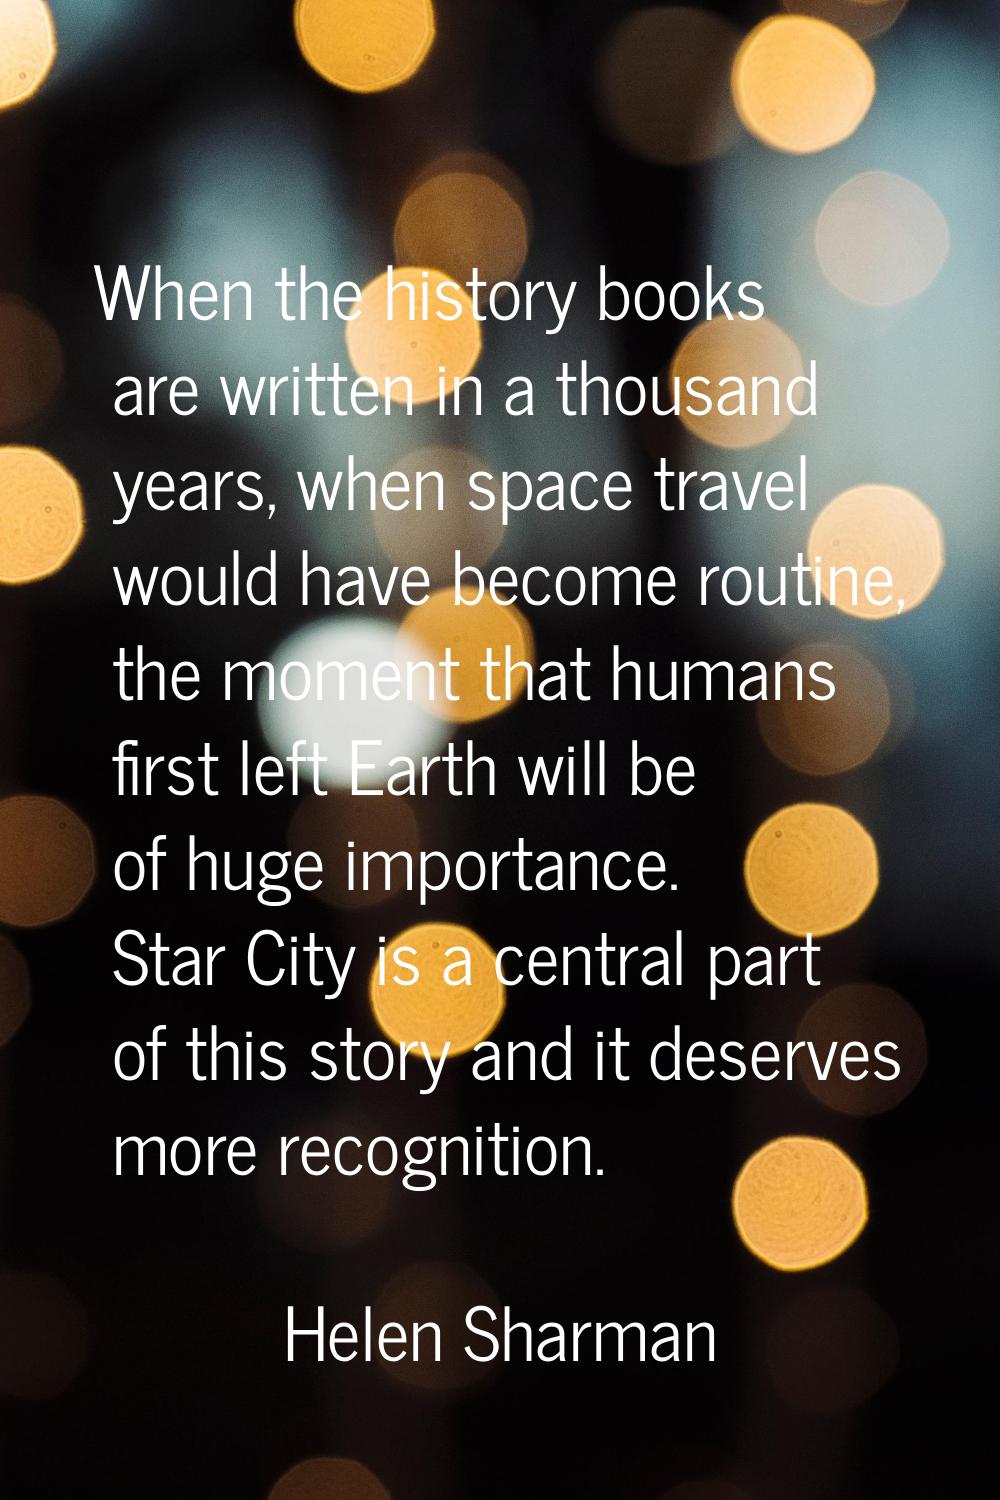 When the history books are written in a thousand years, when space travel would have become routine